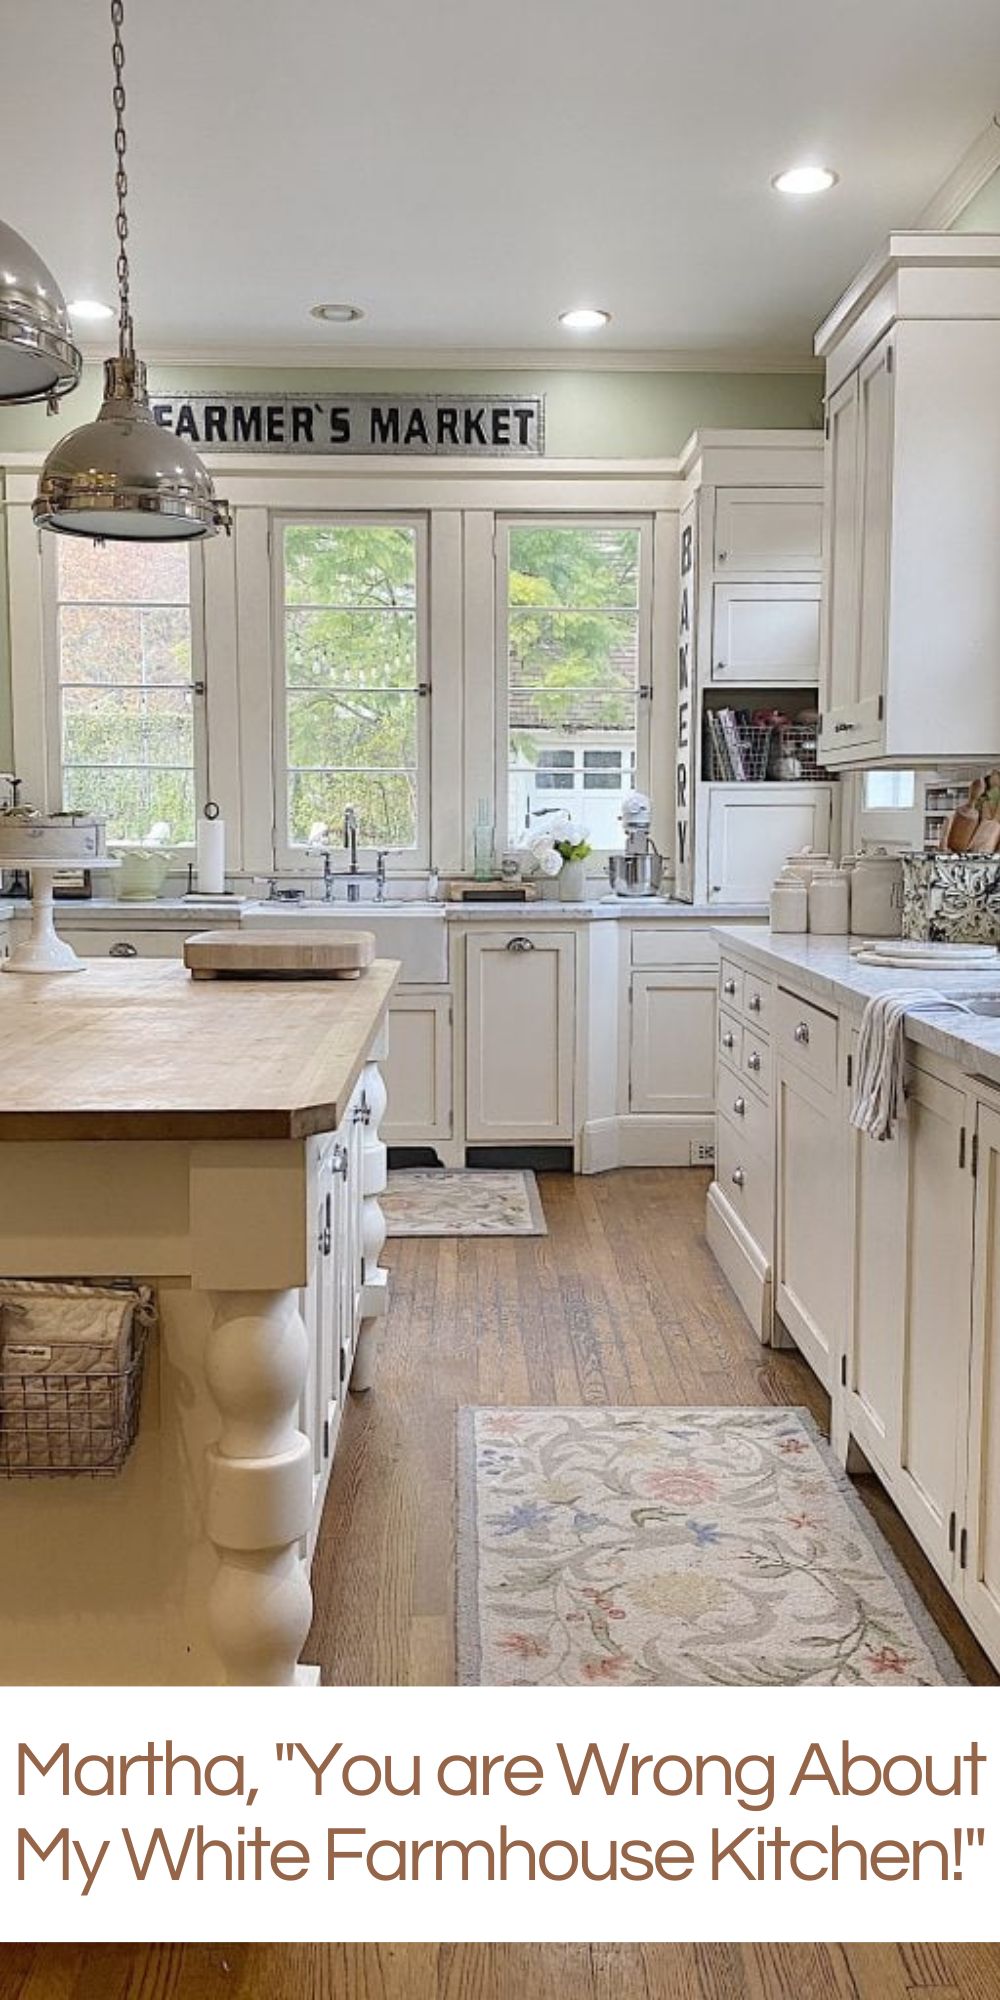 Martha, You are Wrong About My White Farmhouse Kitchen! and